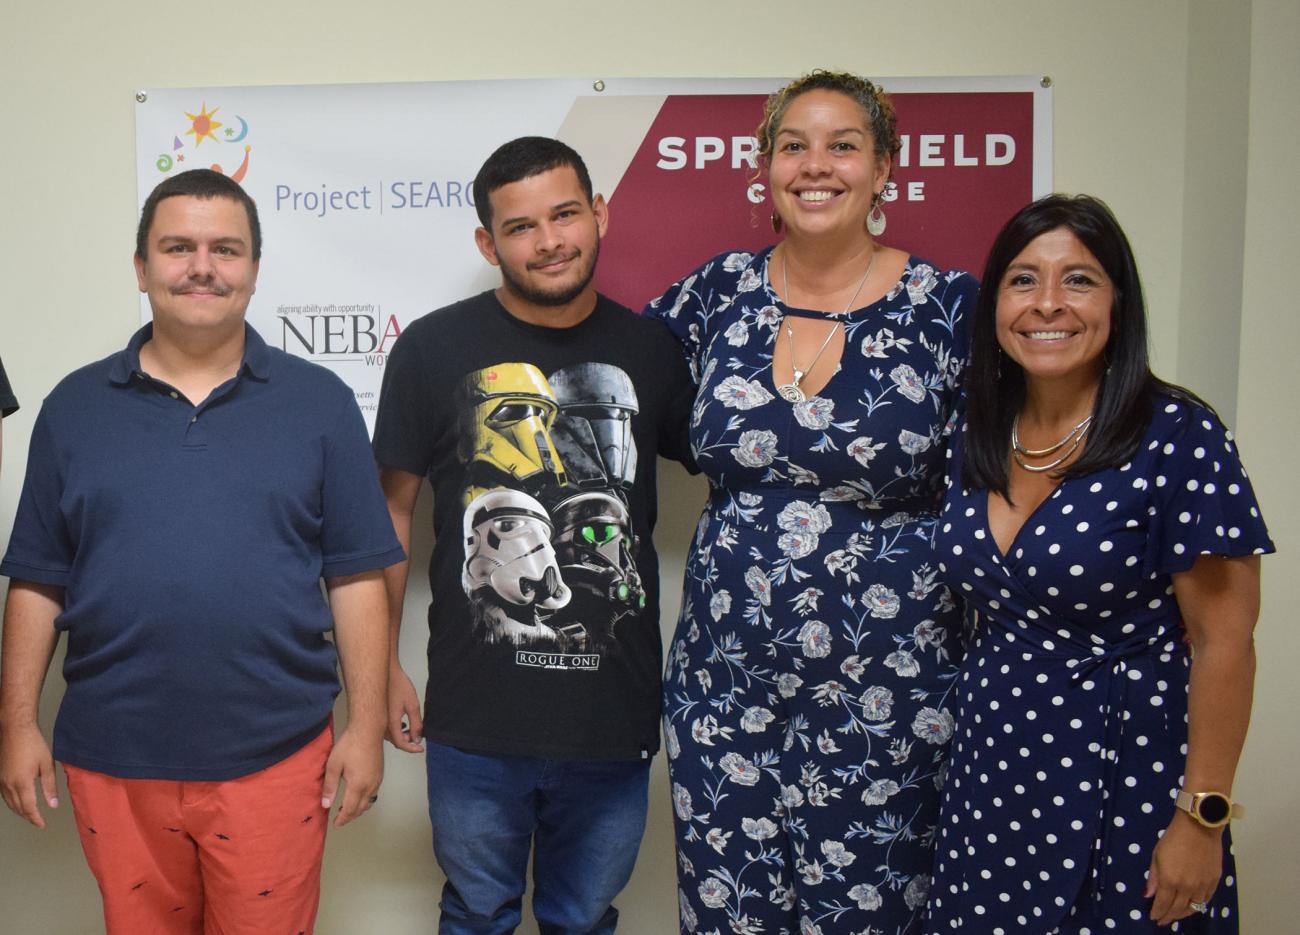 Springfield College Continues Collaboration with New England Business Associates to Introduce Project SEARCH Second Cohort 